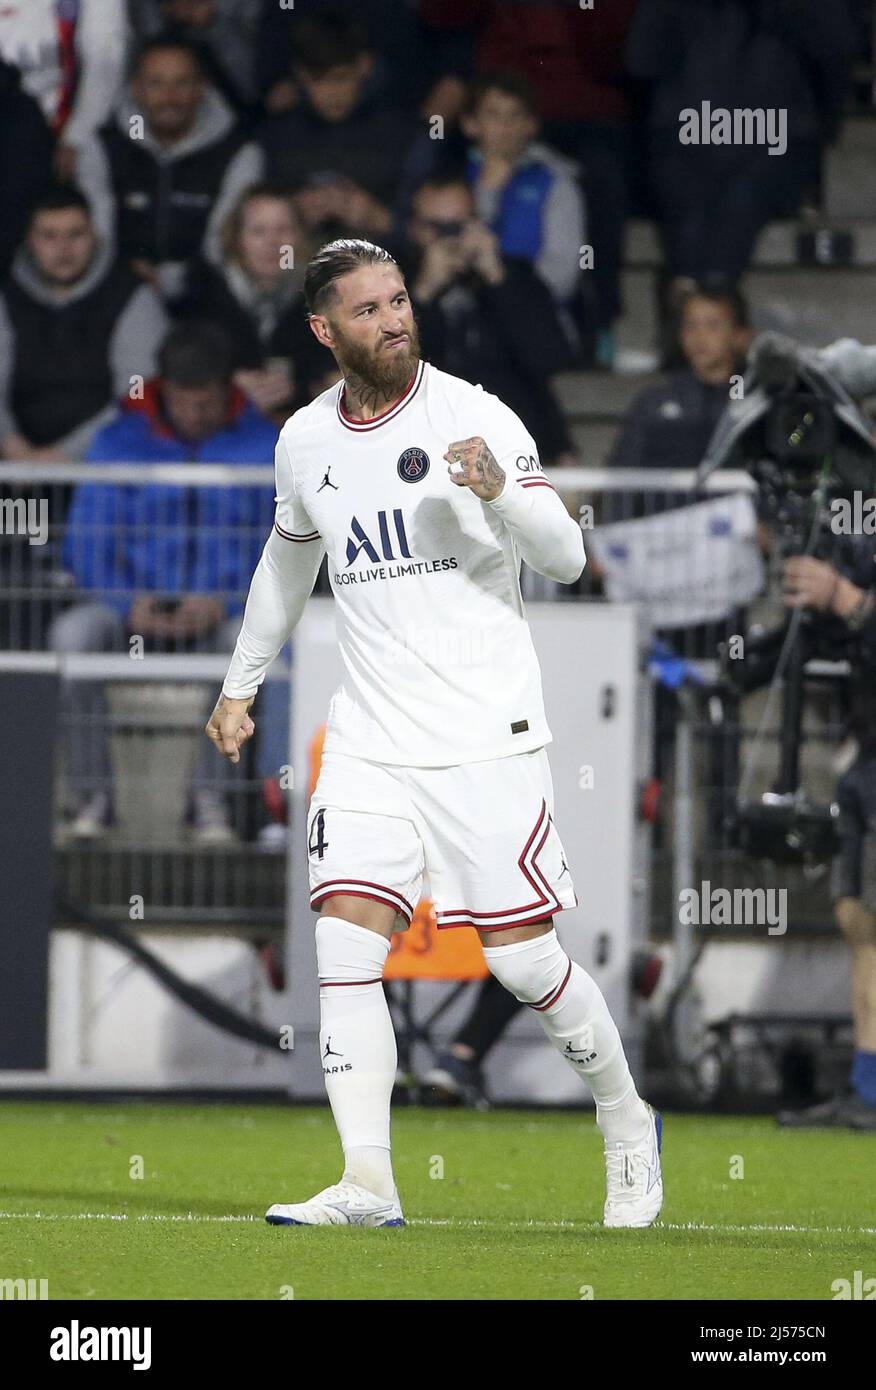 April 20, 2022, Angers, France: Sergio Ramos of PSG celebrates his goal  during the French championship Ligue 1 football match between SCO Angers  and Paris Saint-Germain on April 20, 2022 at Raymond